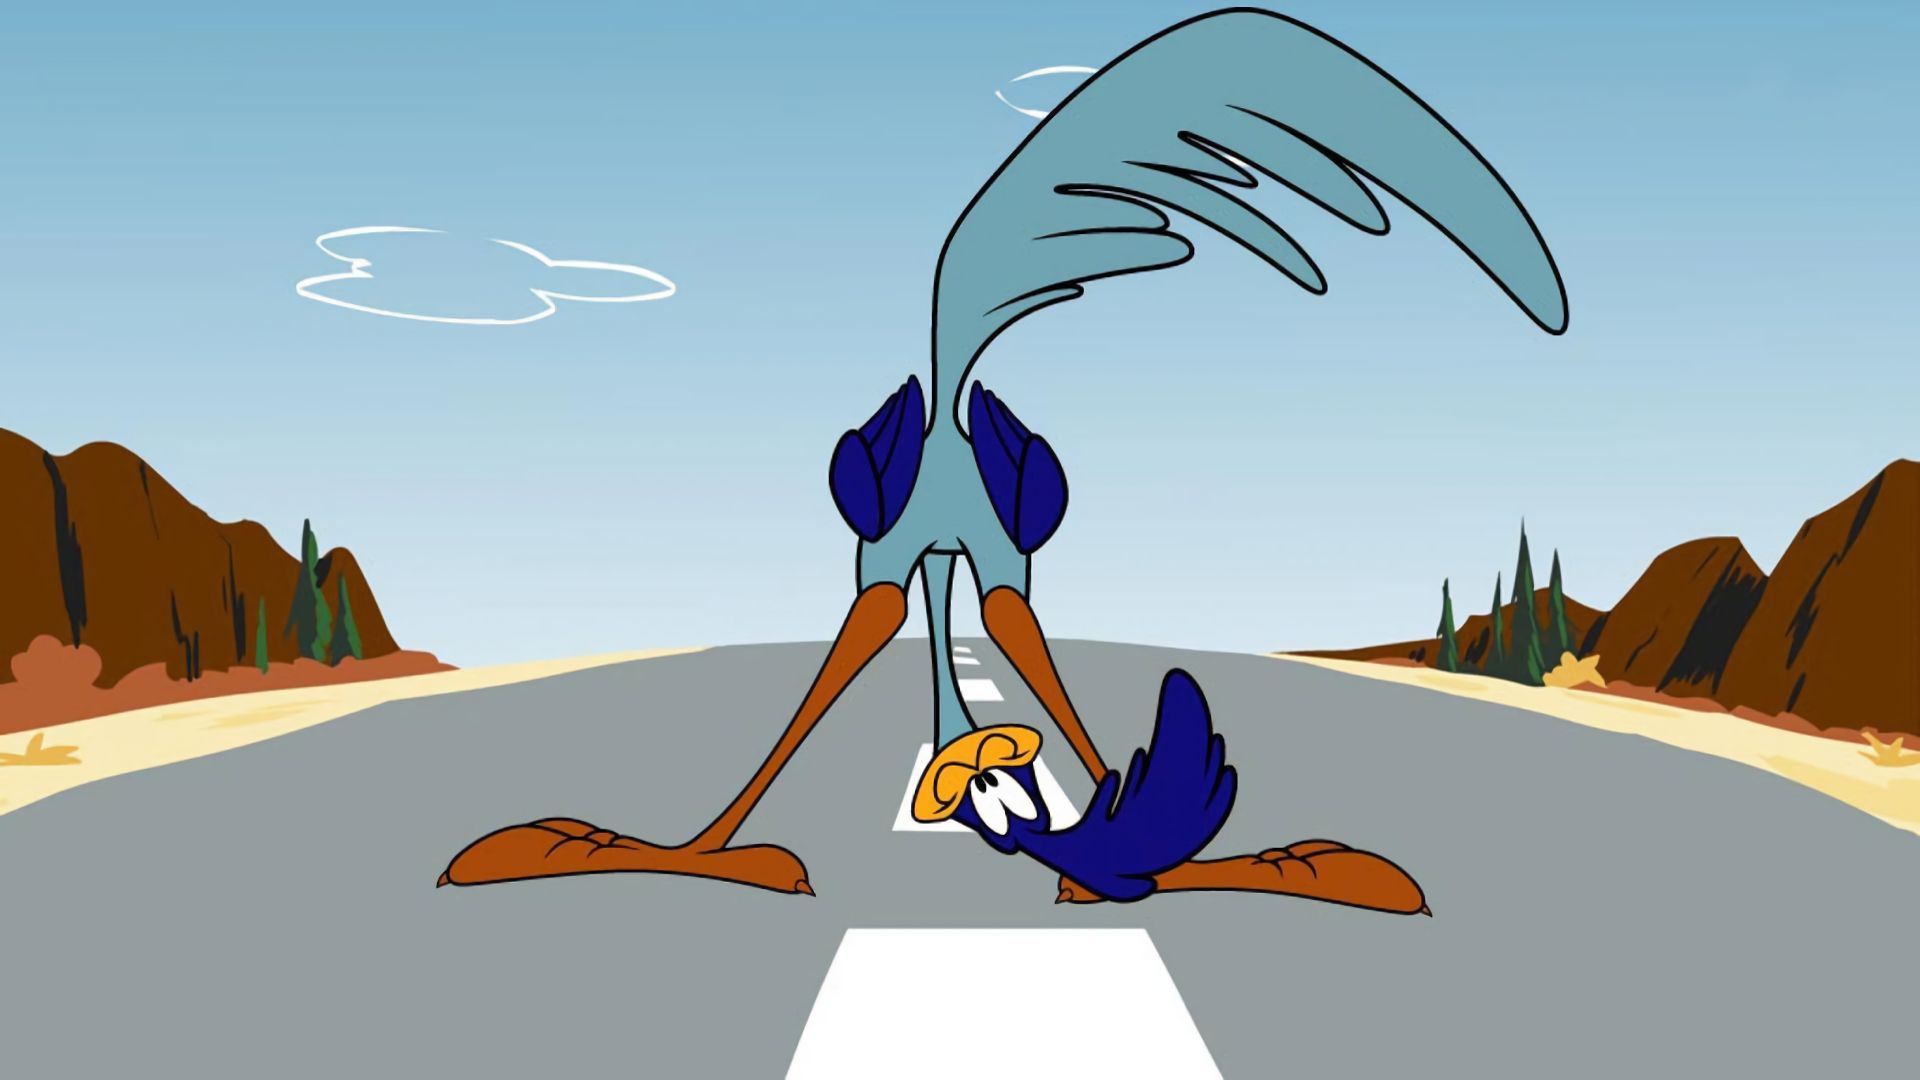 road runner, wile e coyote and the road runner, tv show, looney tunes UHD